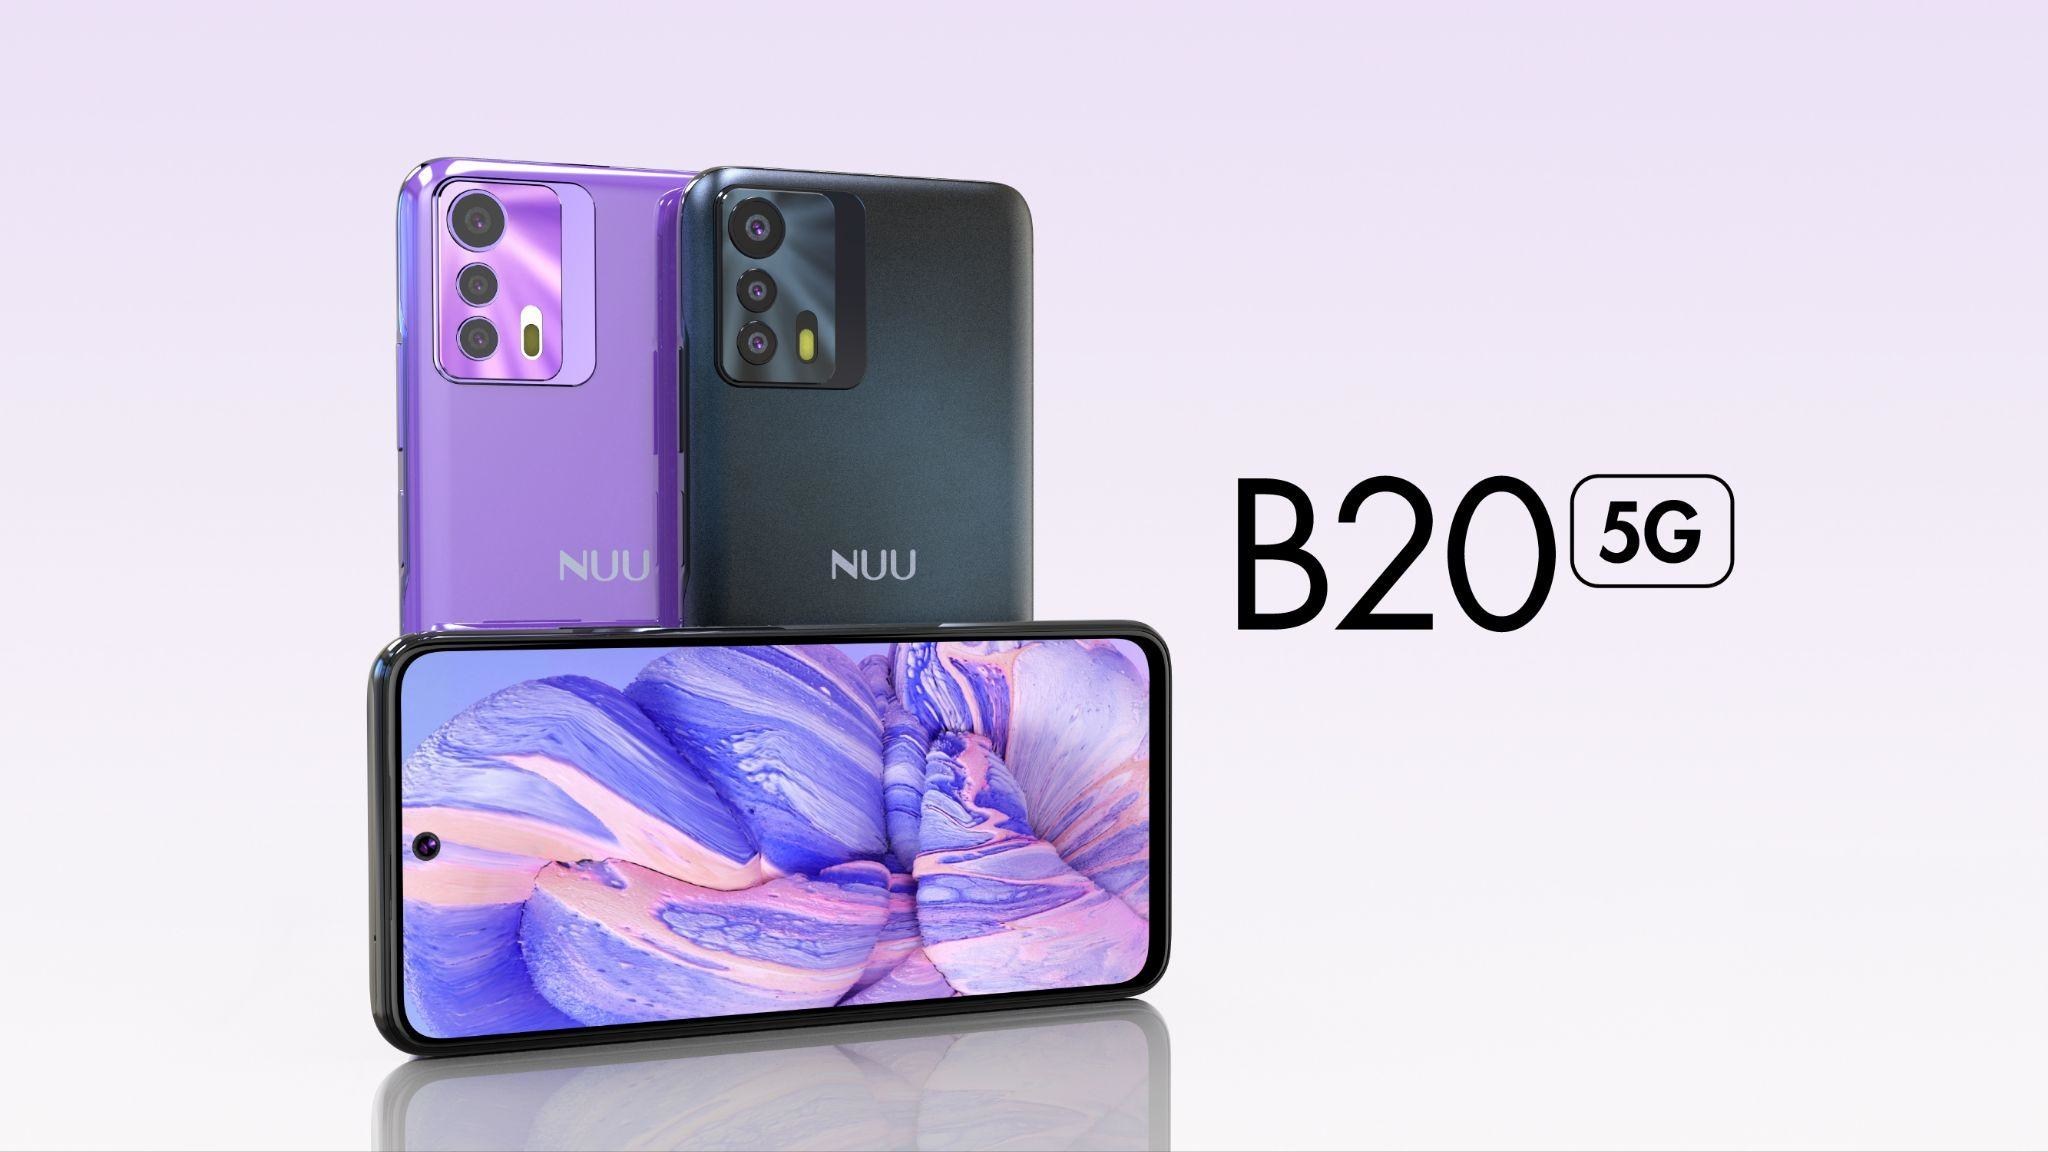 NUU Announces its First 5G Smartphone - the B20 5G